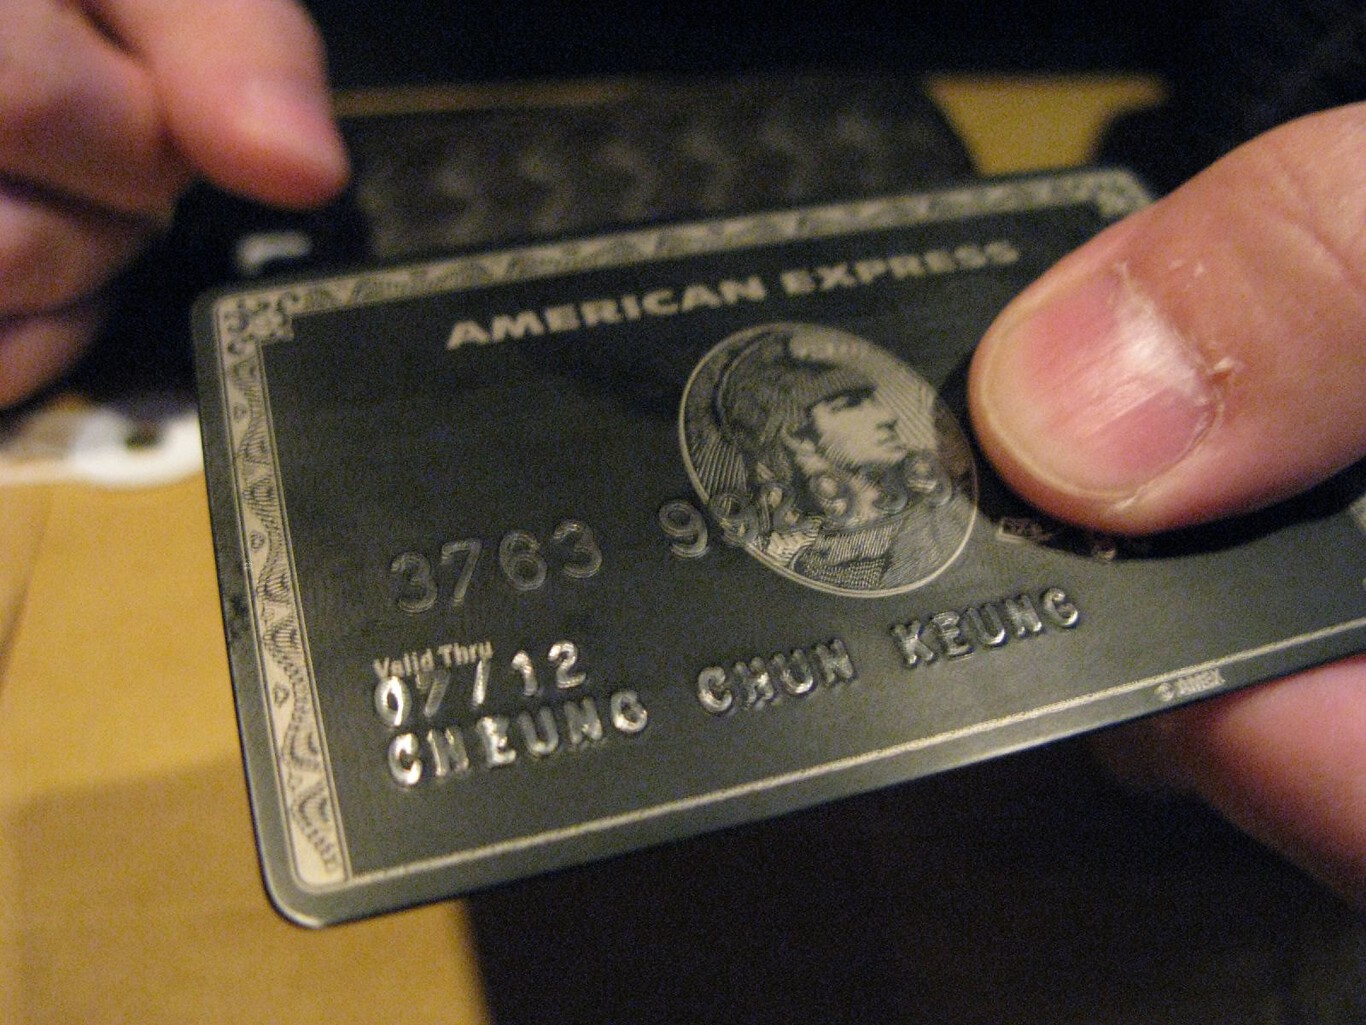 American Express Centurion this is the exclusive card for the great fortunes of the planet